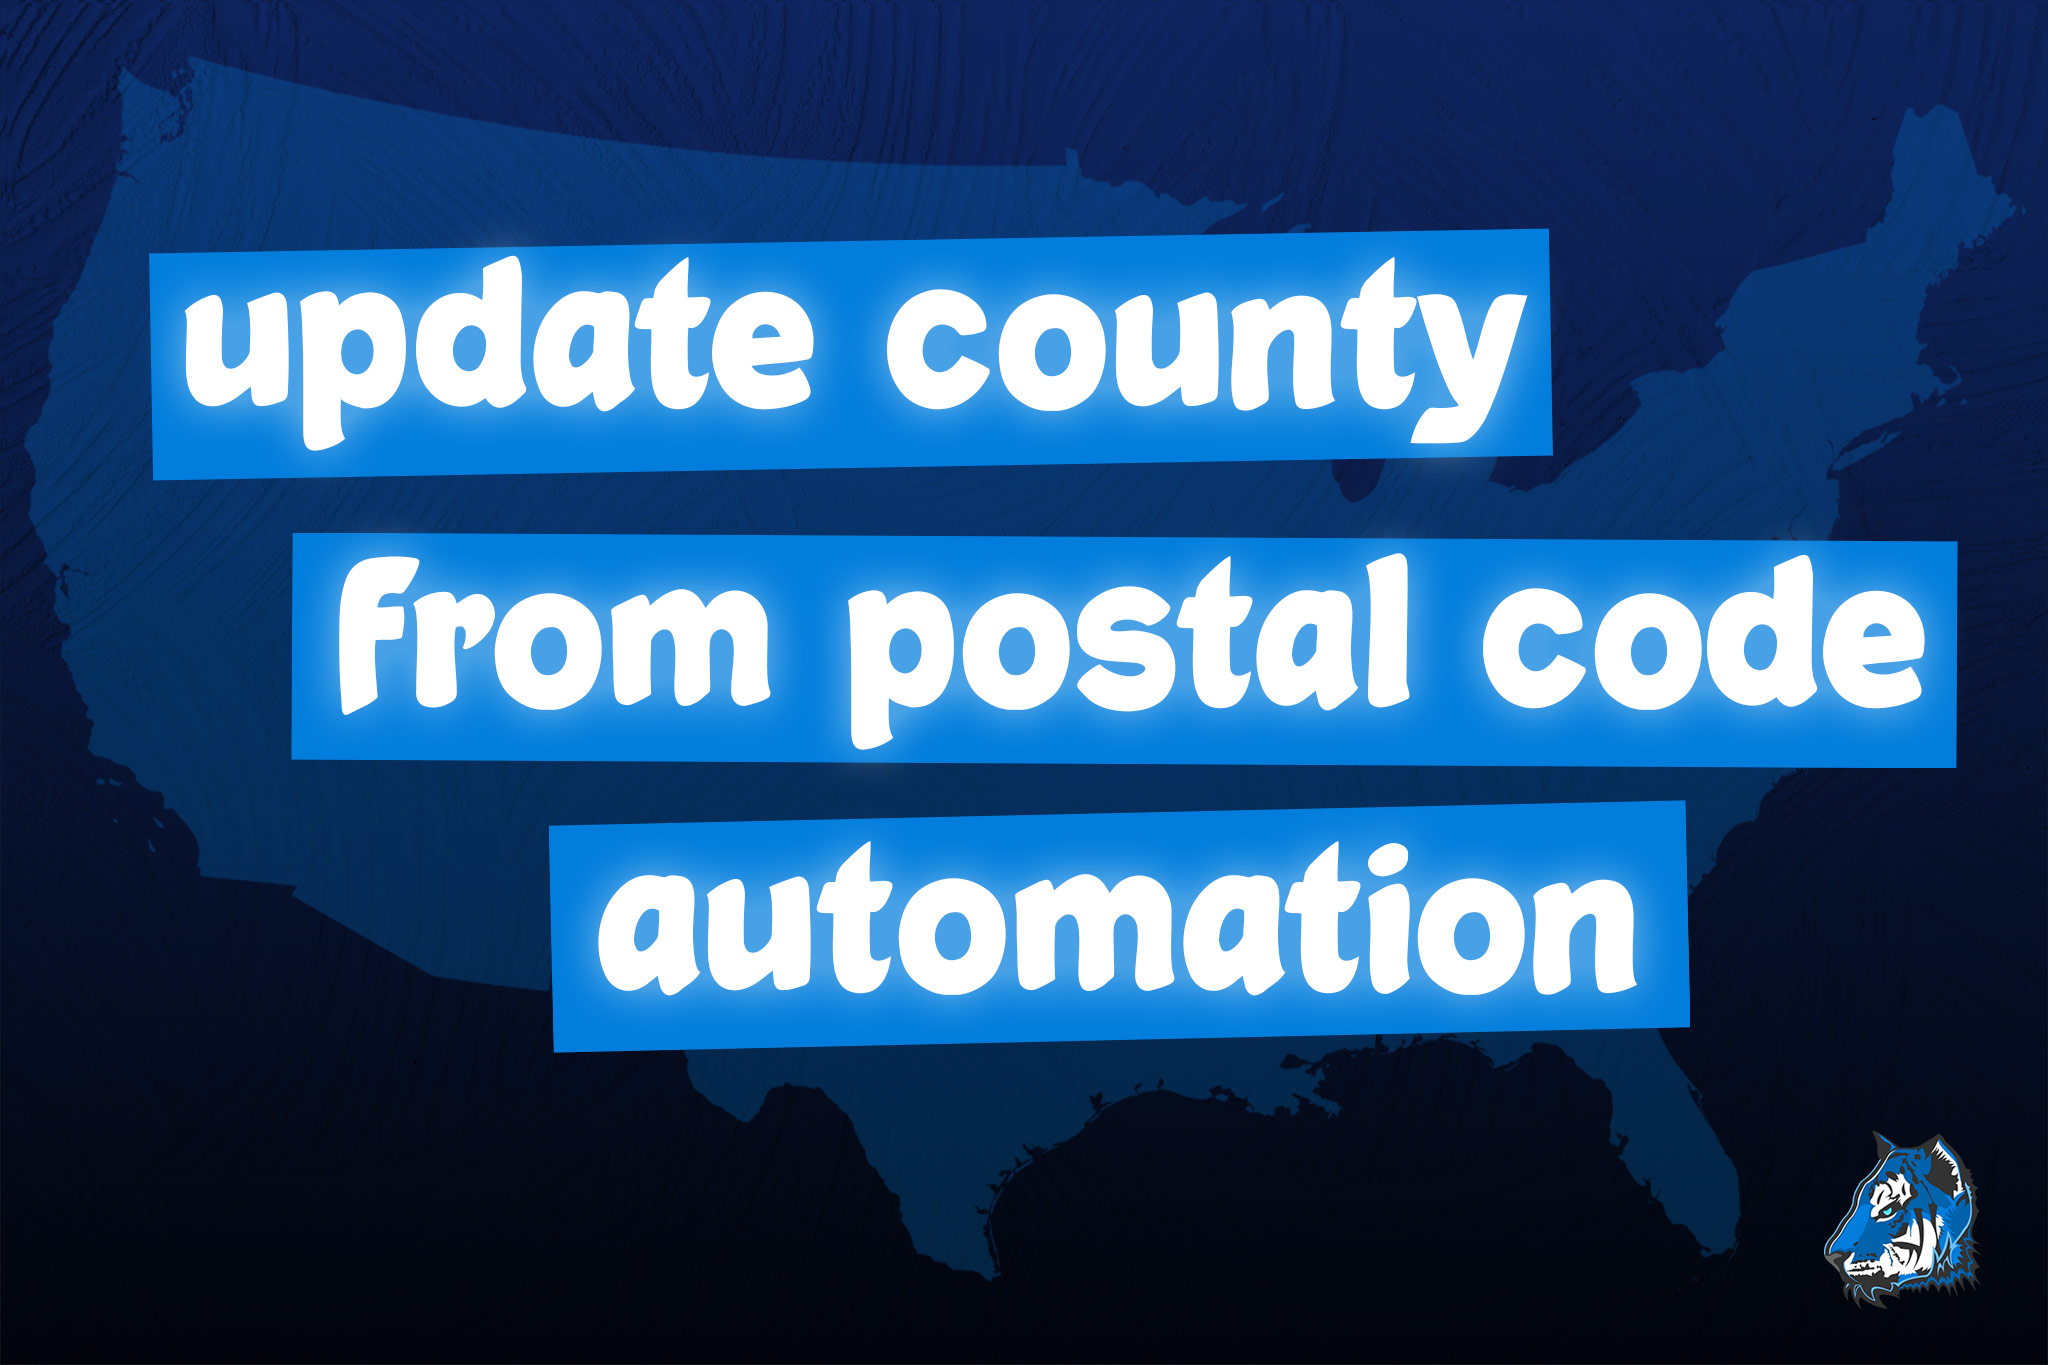 Update County from Postal Code Automation